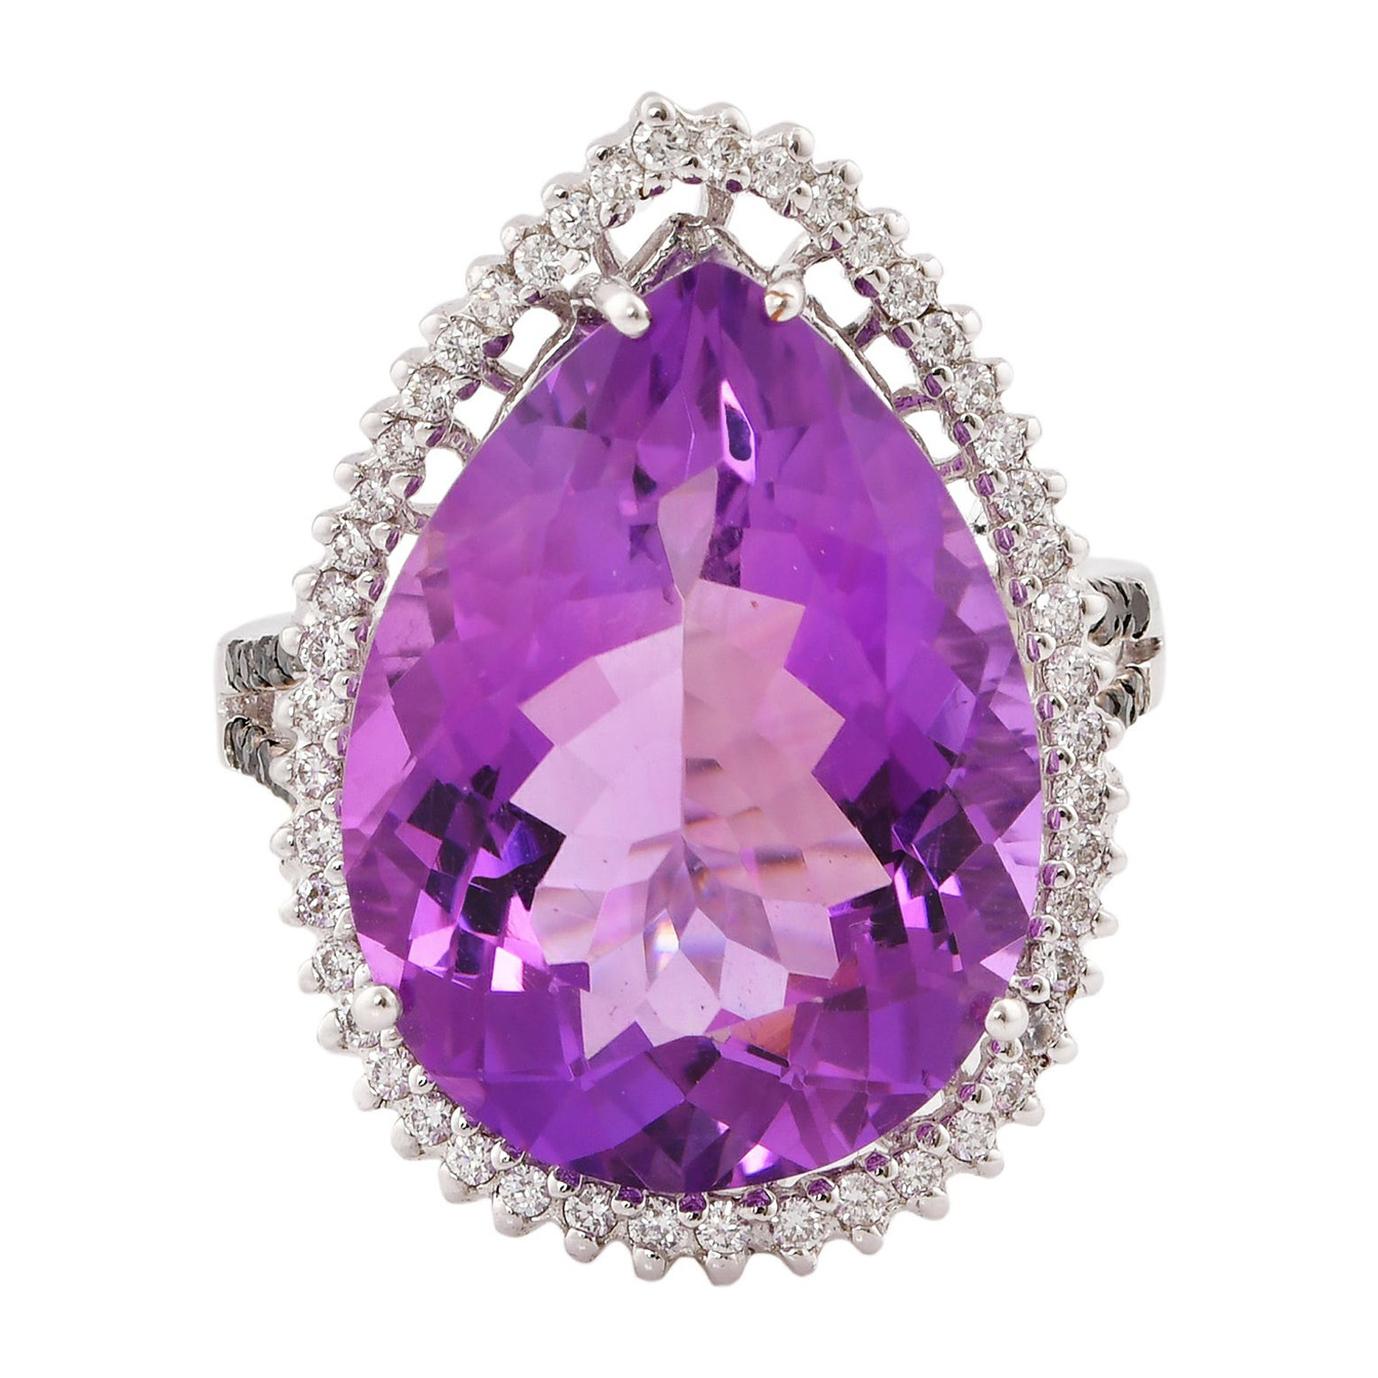 13 Carat Amethyst and Diamond Ring in 14 Karat White Gold For Sale